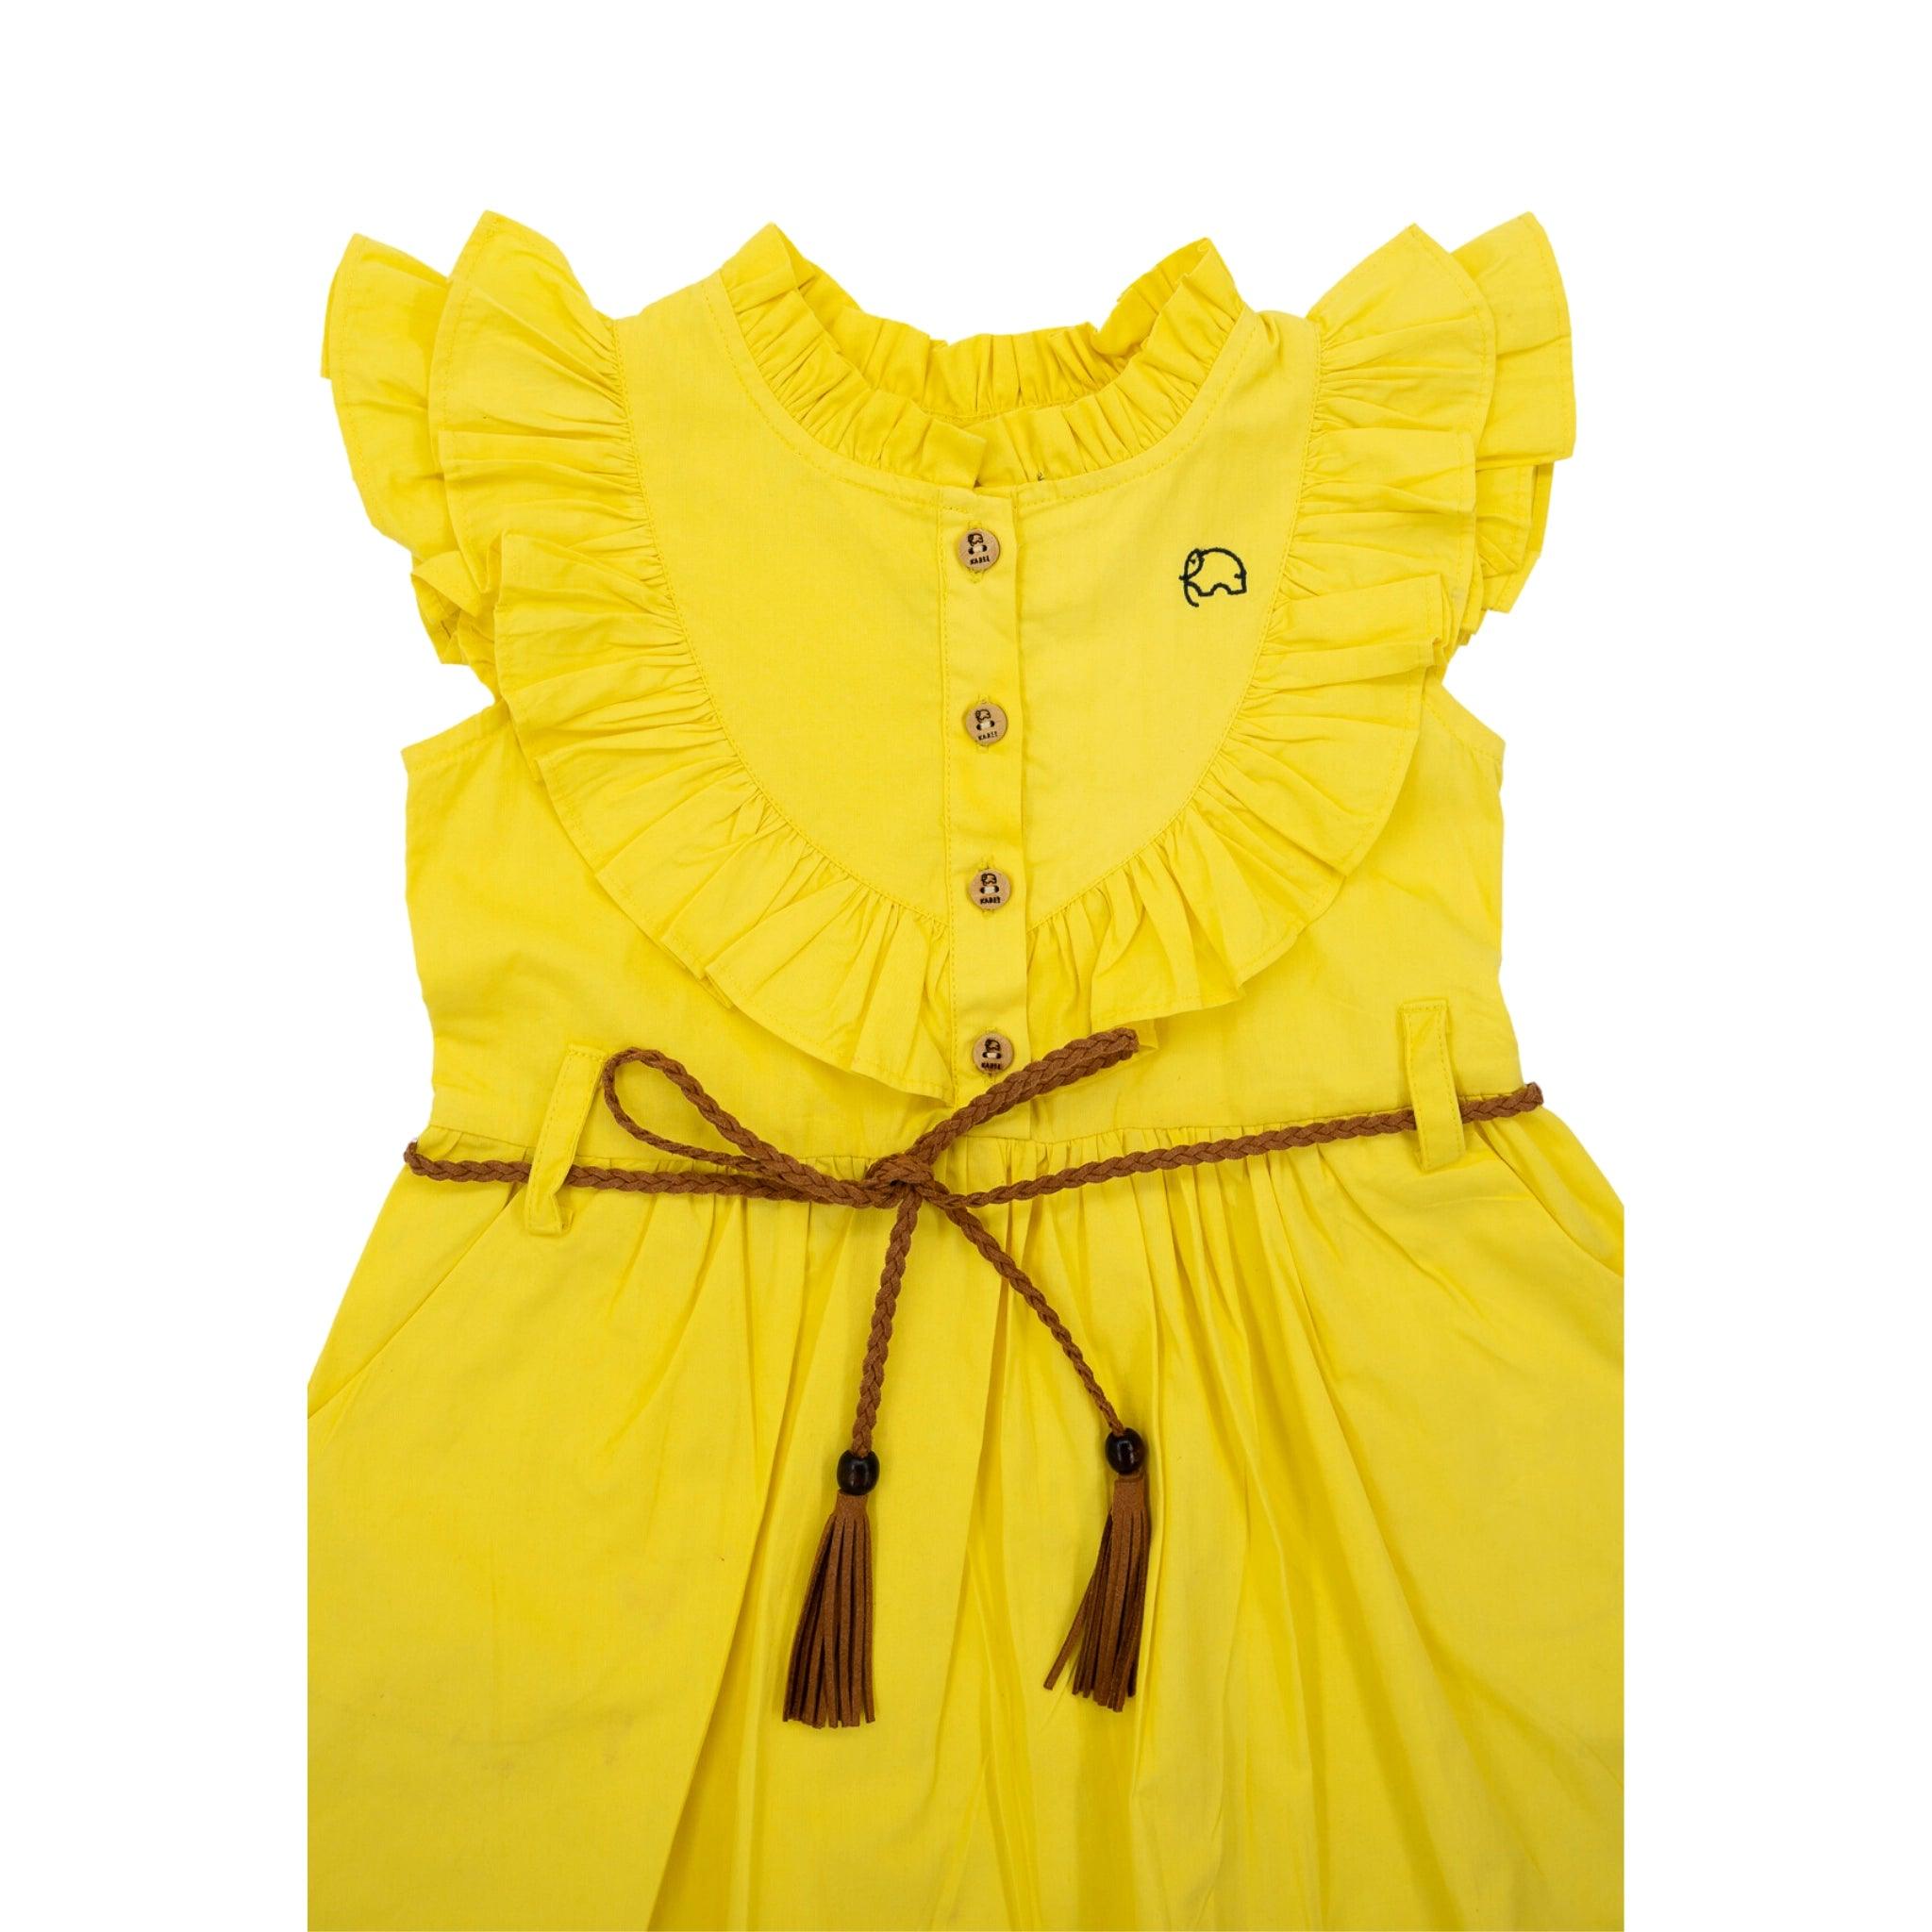 Bright Karee yellow children's dress with butterfly sleeves and a brown tassel belt, displayed against a white background.